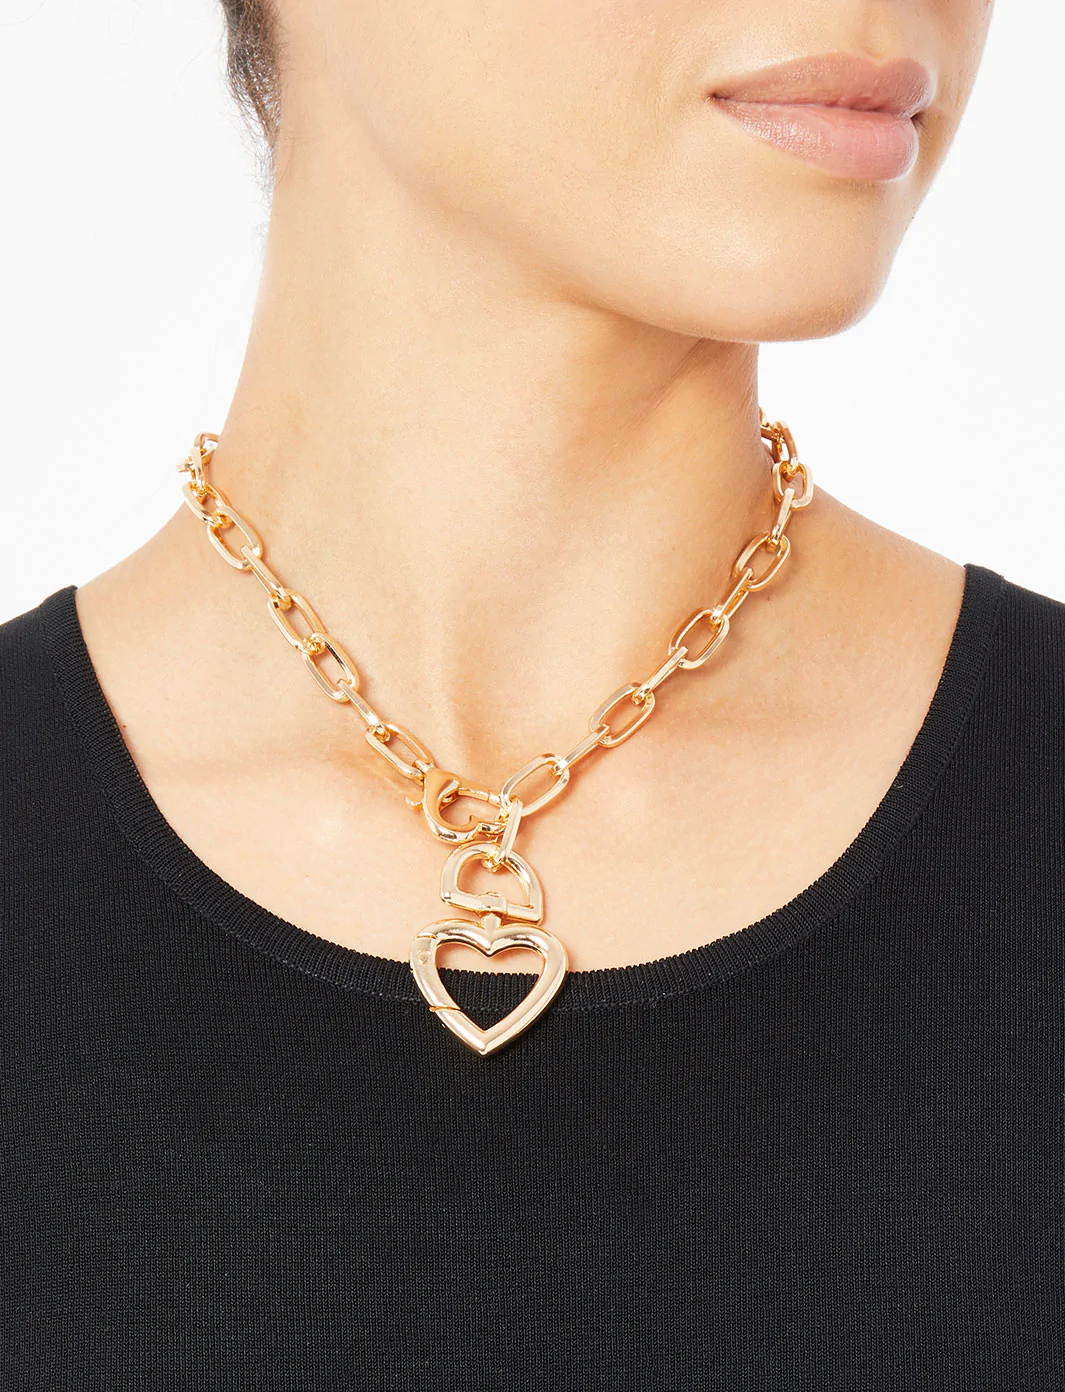 model wearing the gold heart necklace 